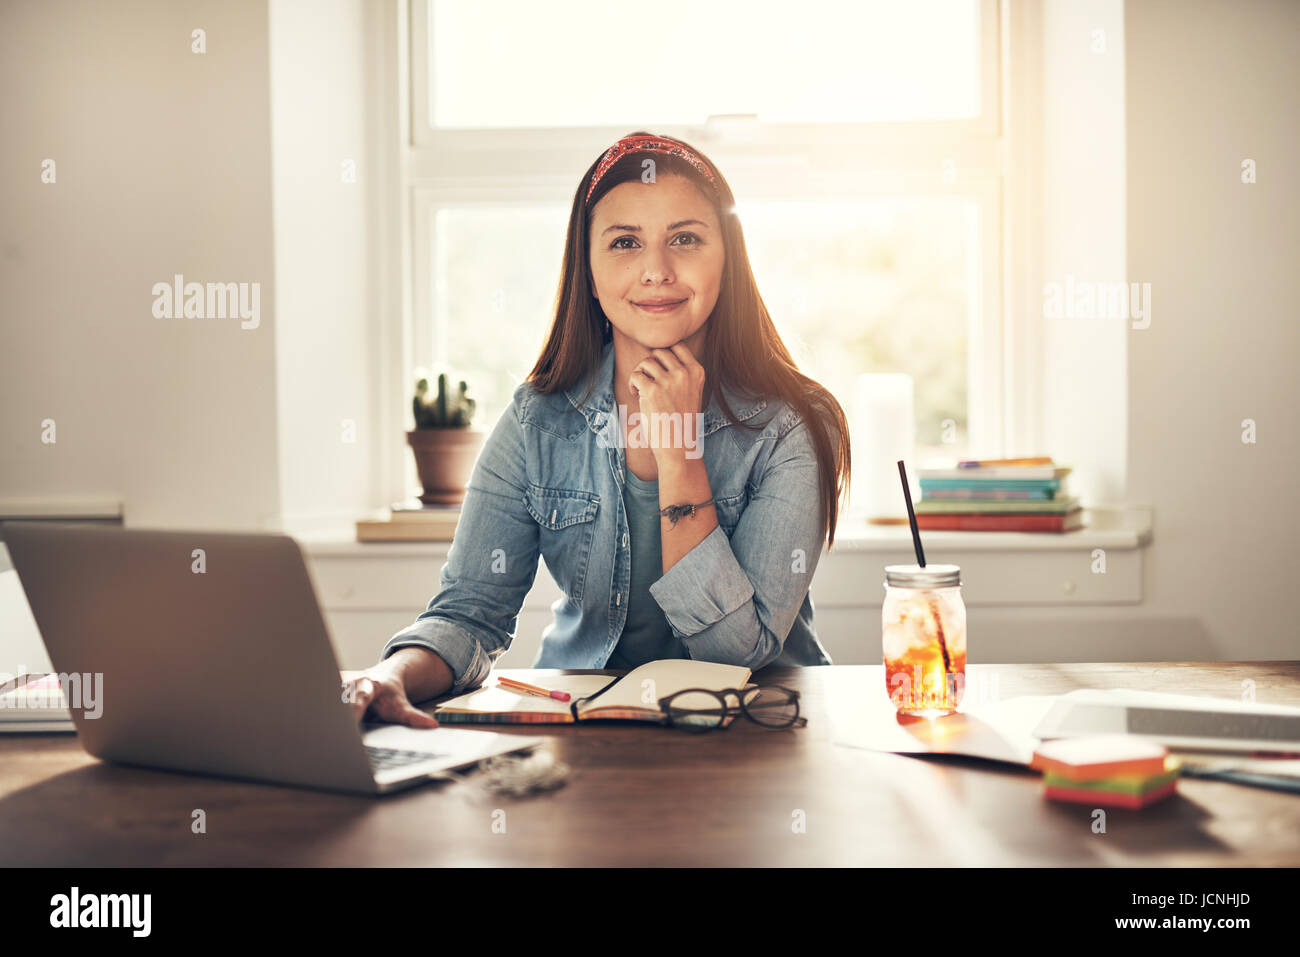 Pretty young businesswoman looking at camera sitting at laptop in office and smiling. Stock Photo